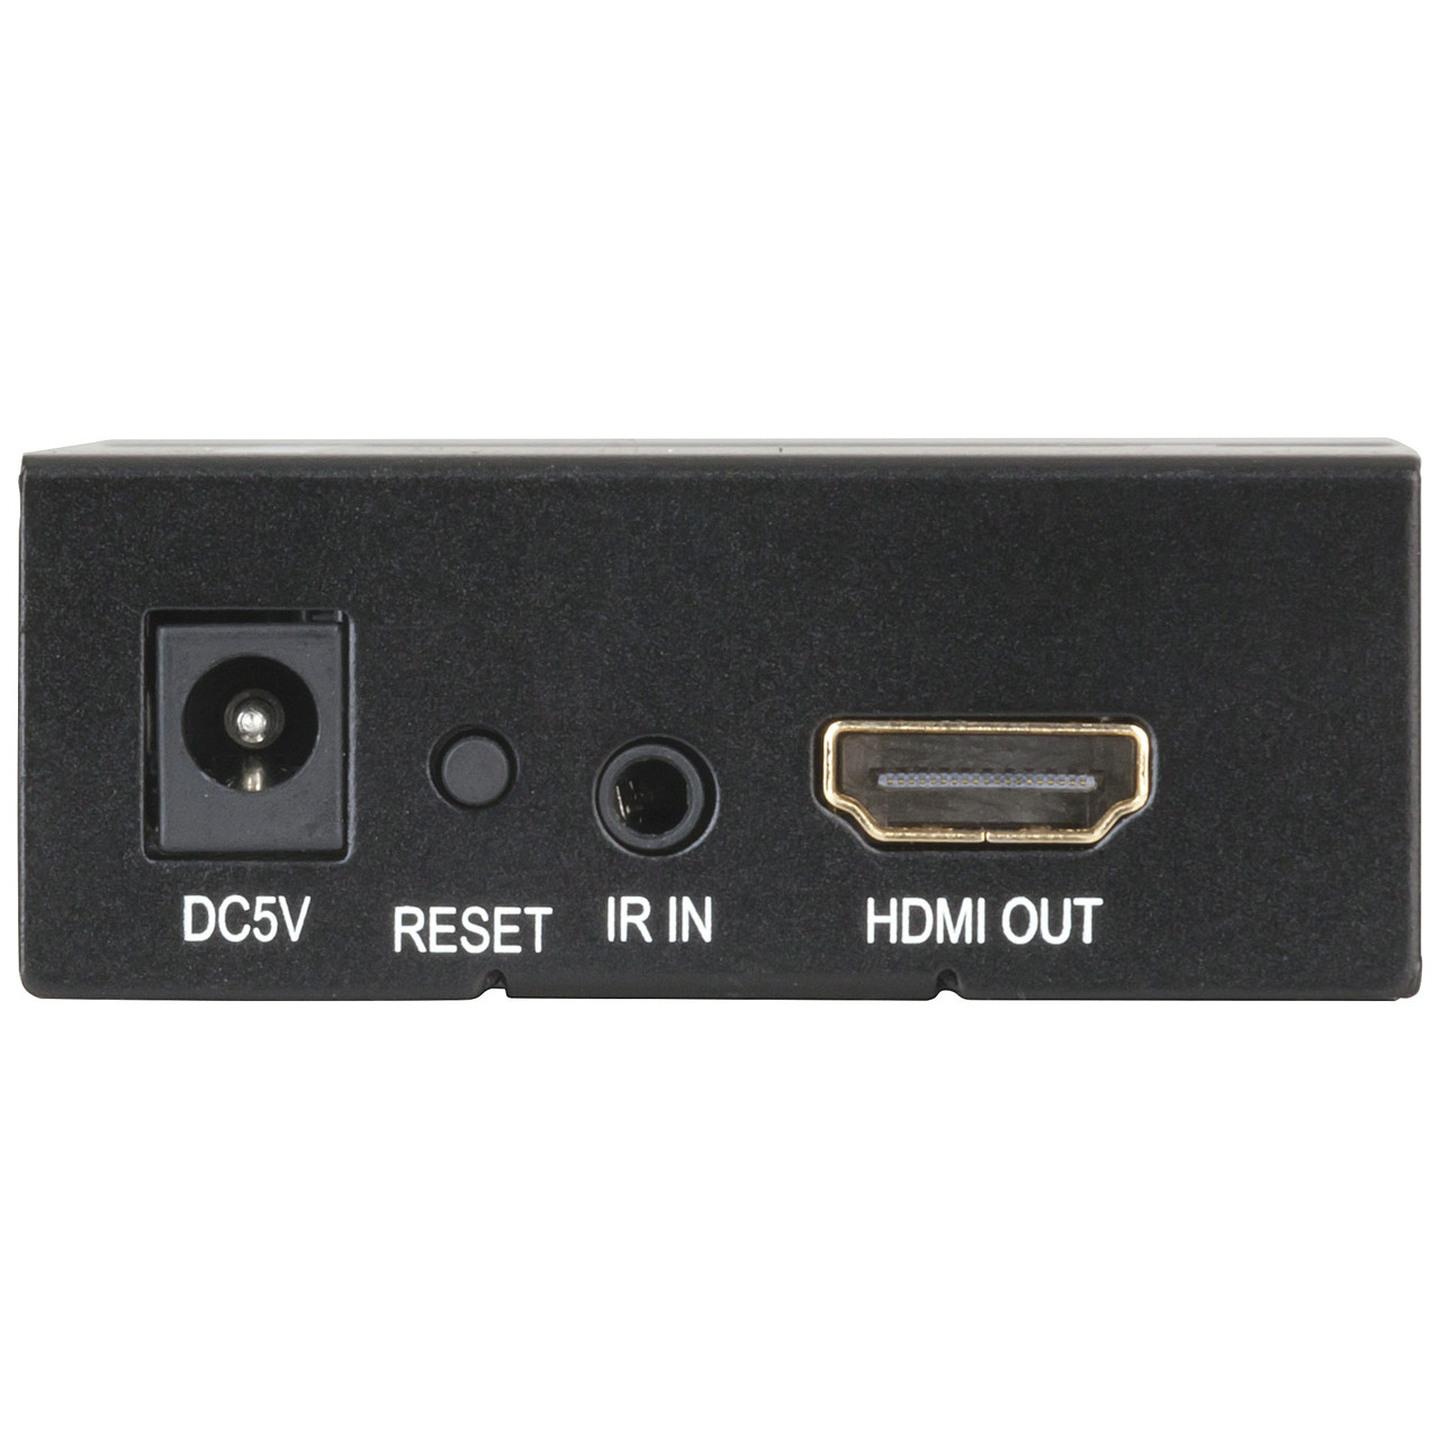 100m HDMI TCP/IP 1080p Extender with Infrared